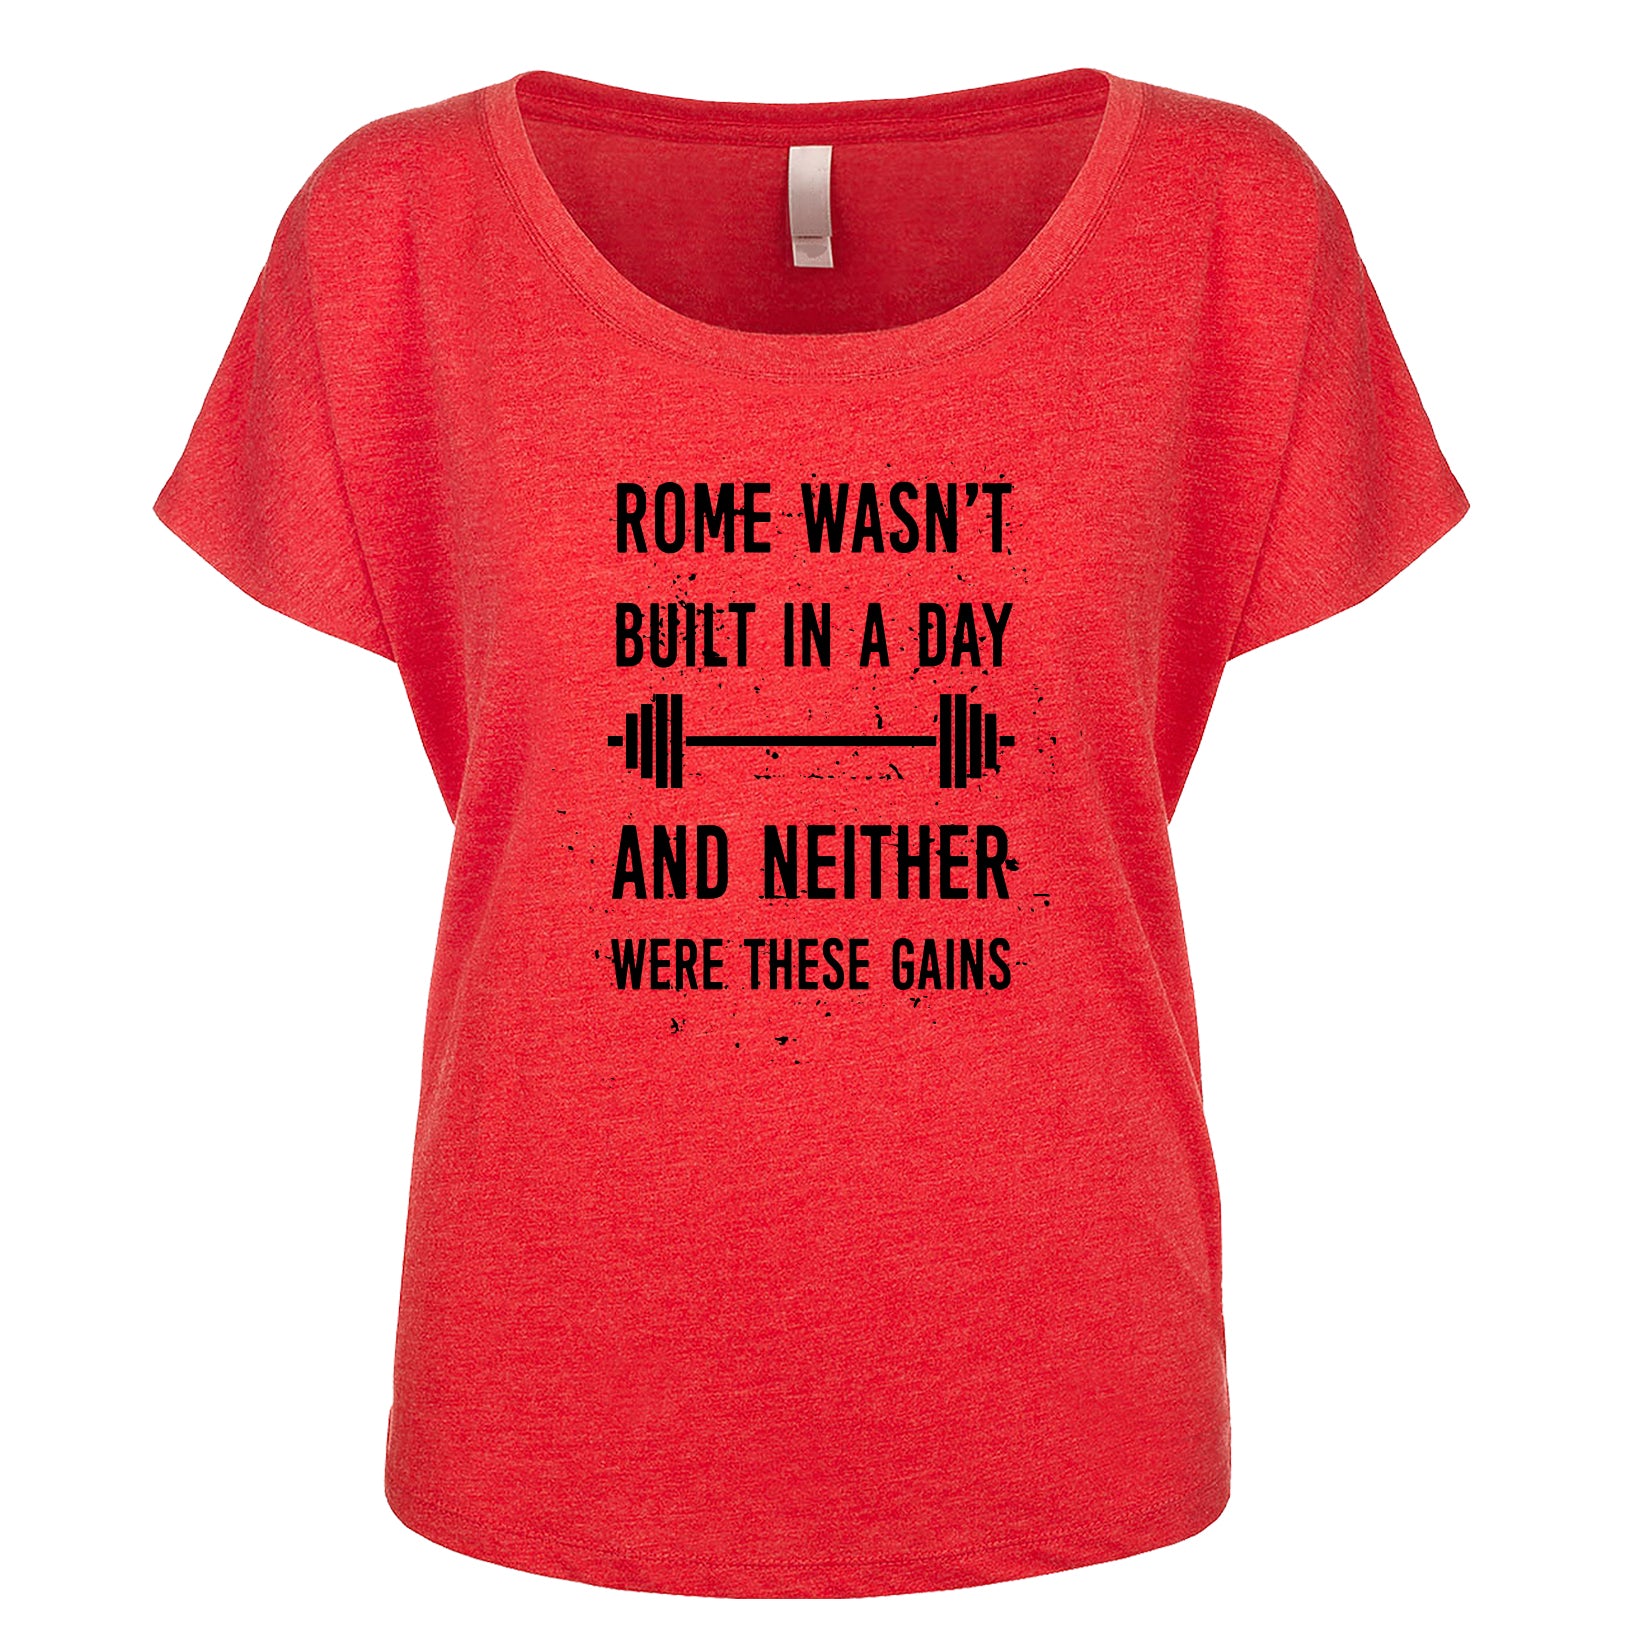 Rome Wasn't Built In A Day And Neither Were These Gains Women's Dolman